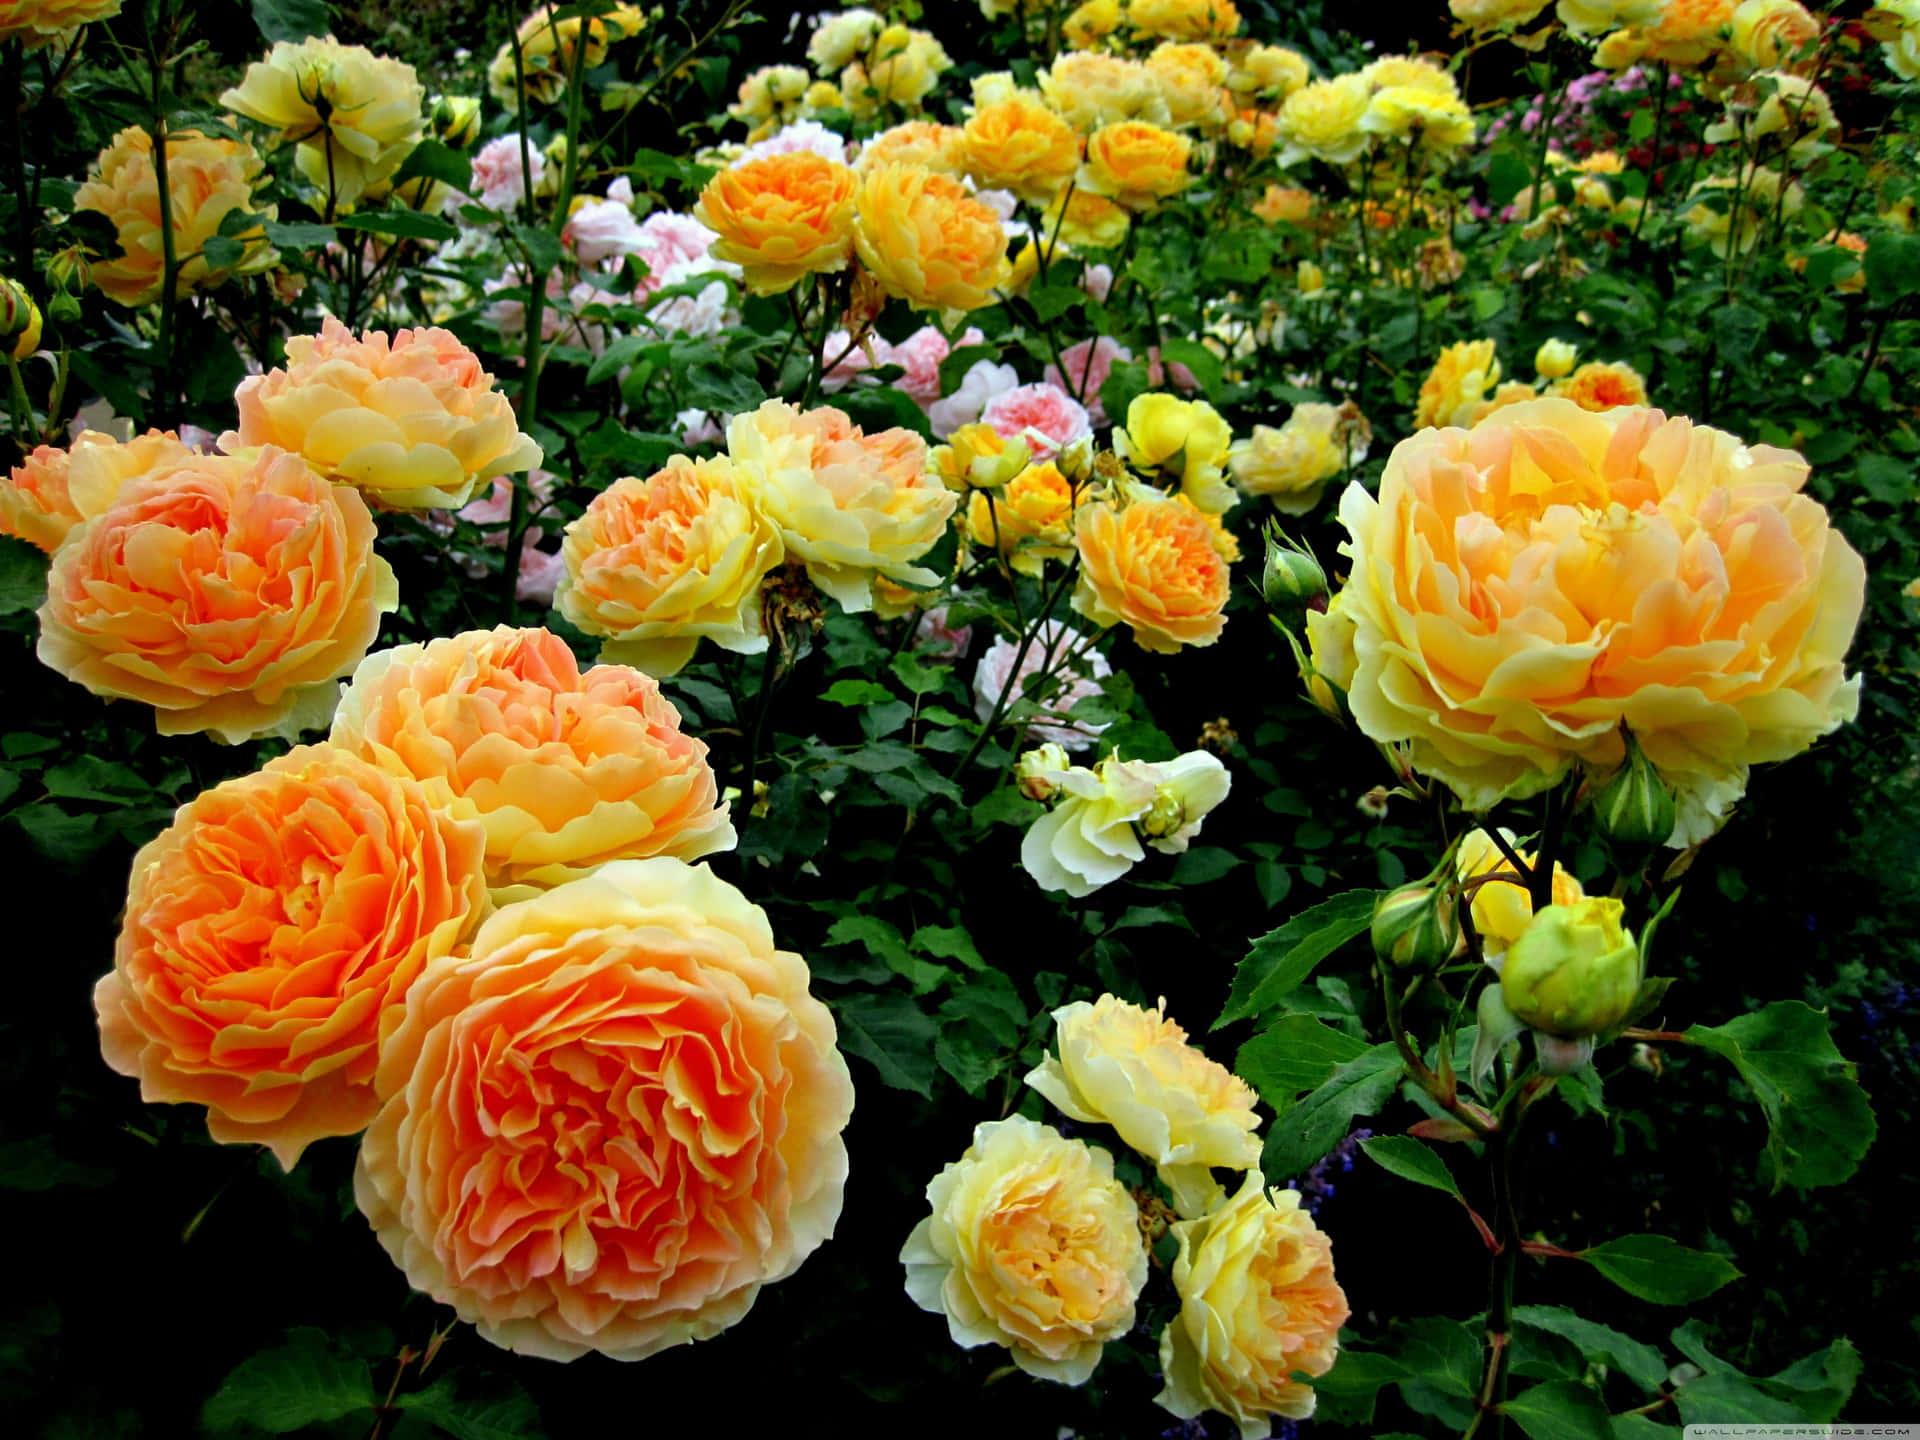 A beautiful arrangement of roses brightens up this enchanting garden.